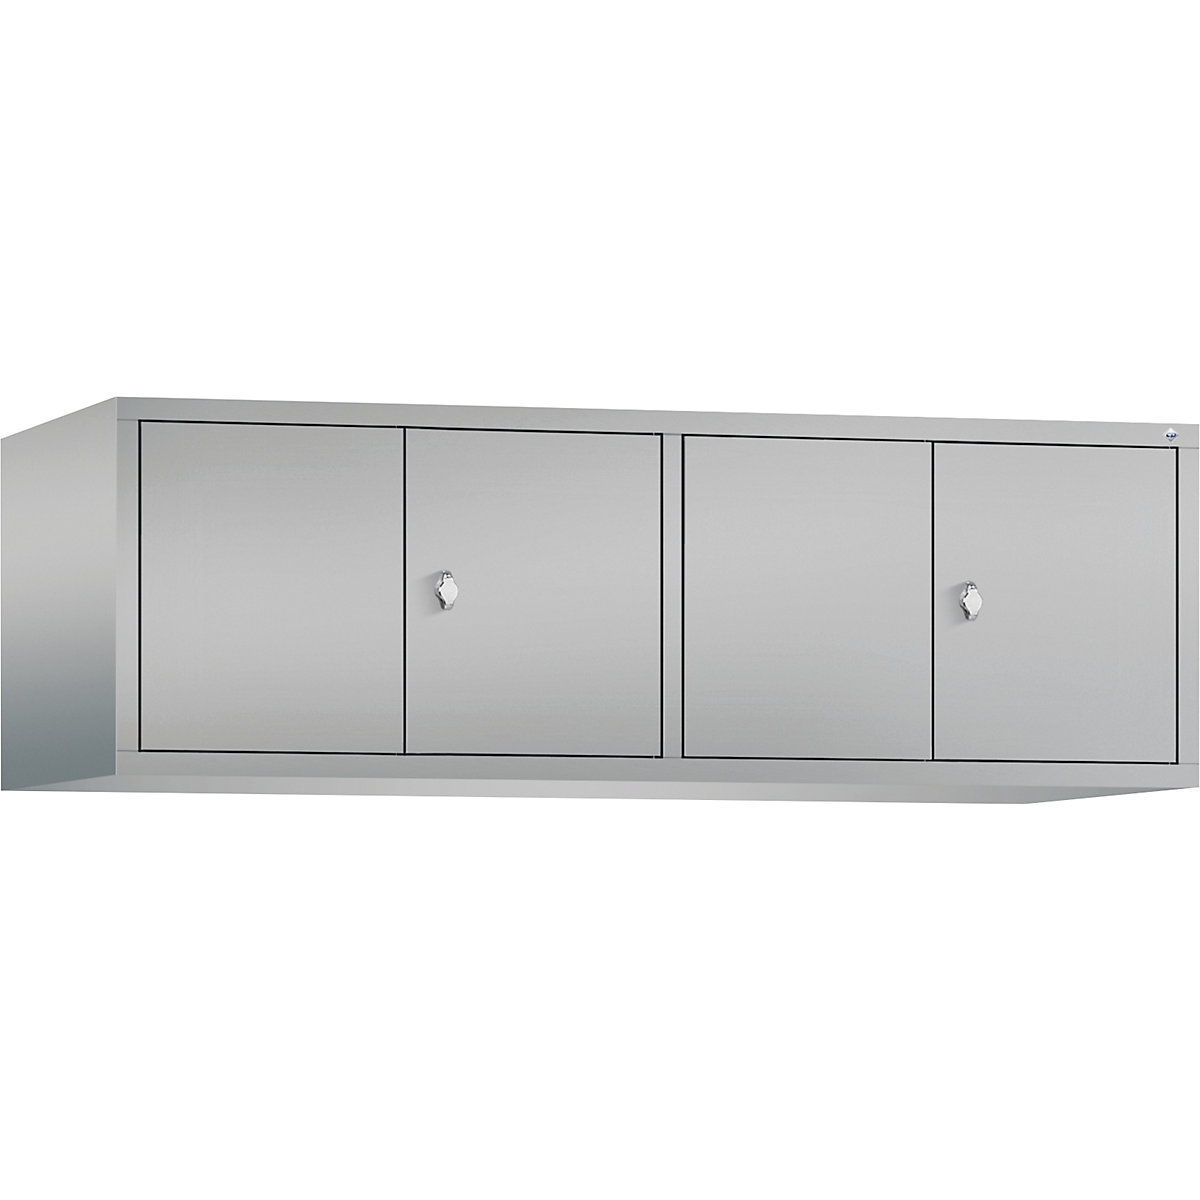 CLASSIC add-on cupboard, doors close in the middle – C+P, 4 compartments, compartment width 400 mm, white aluminium-3